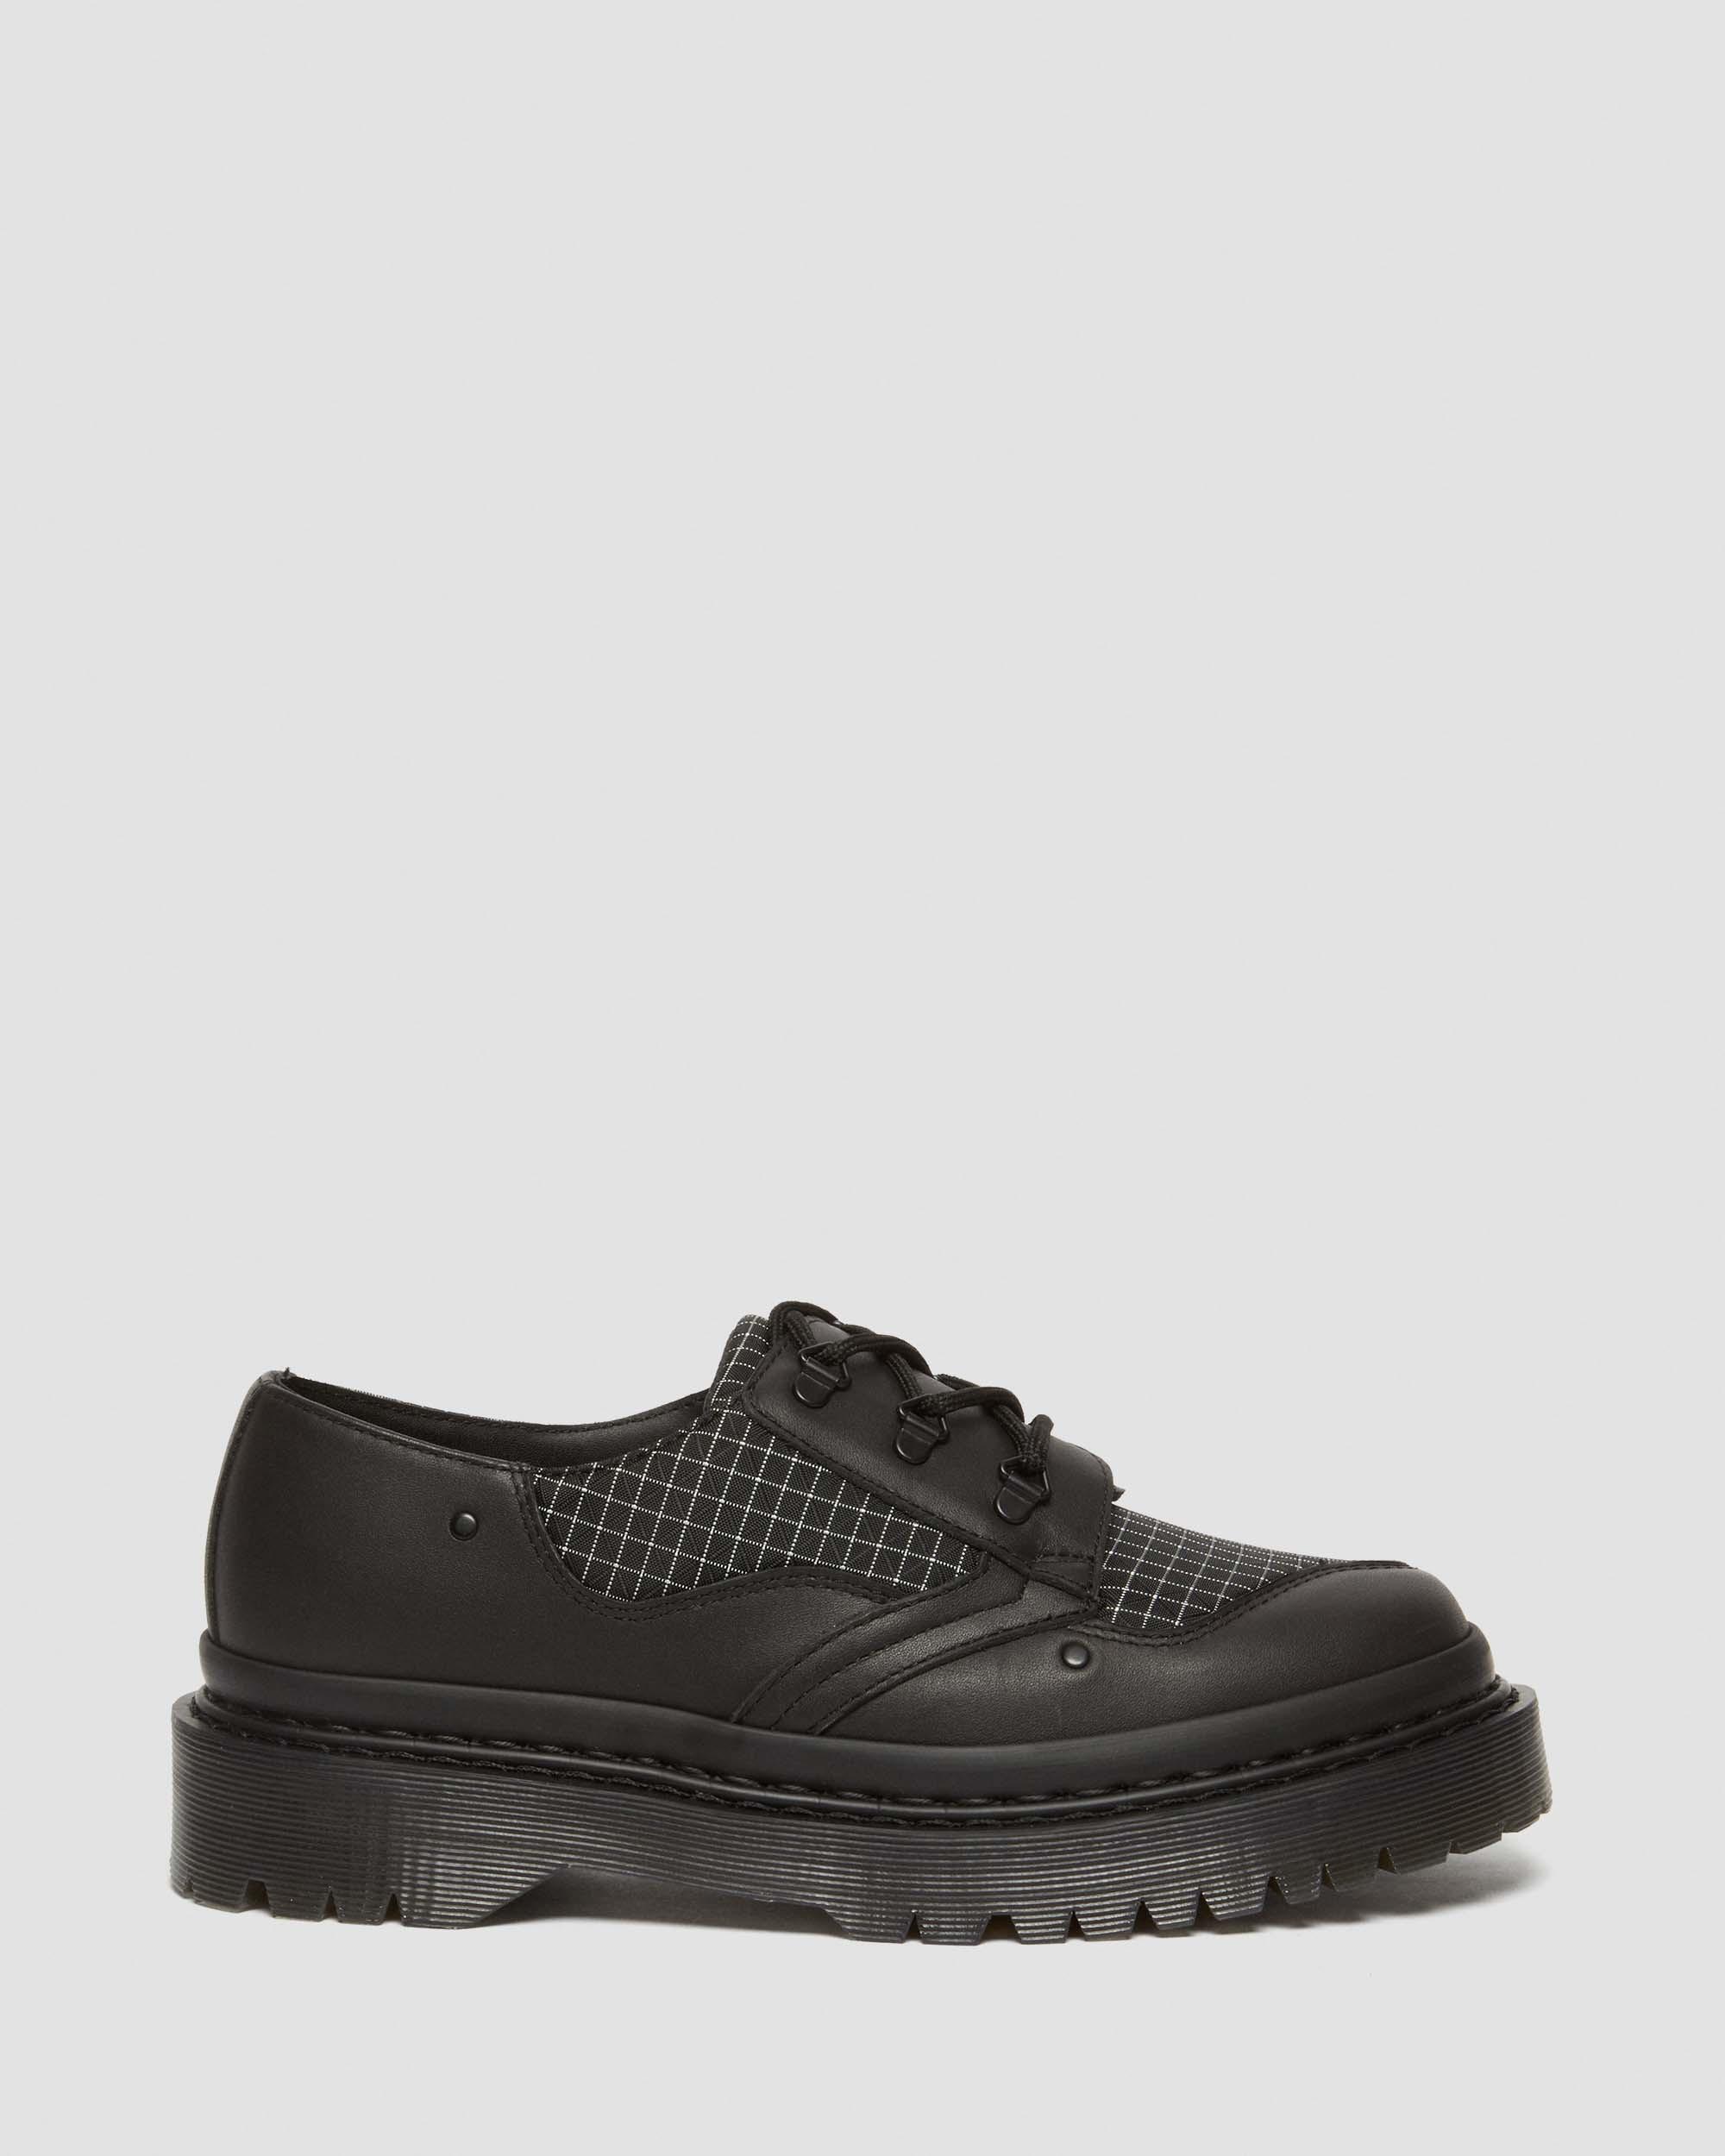 1461 Bex Ripstop Grid Oxford Shoes in Black+Black+White